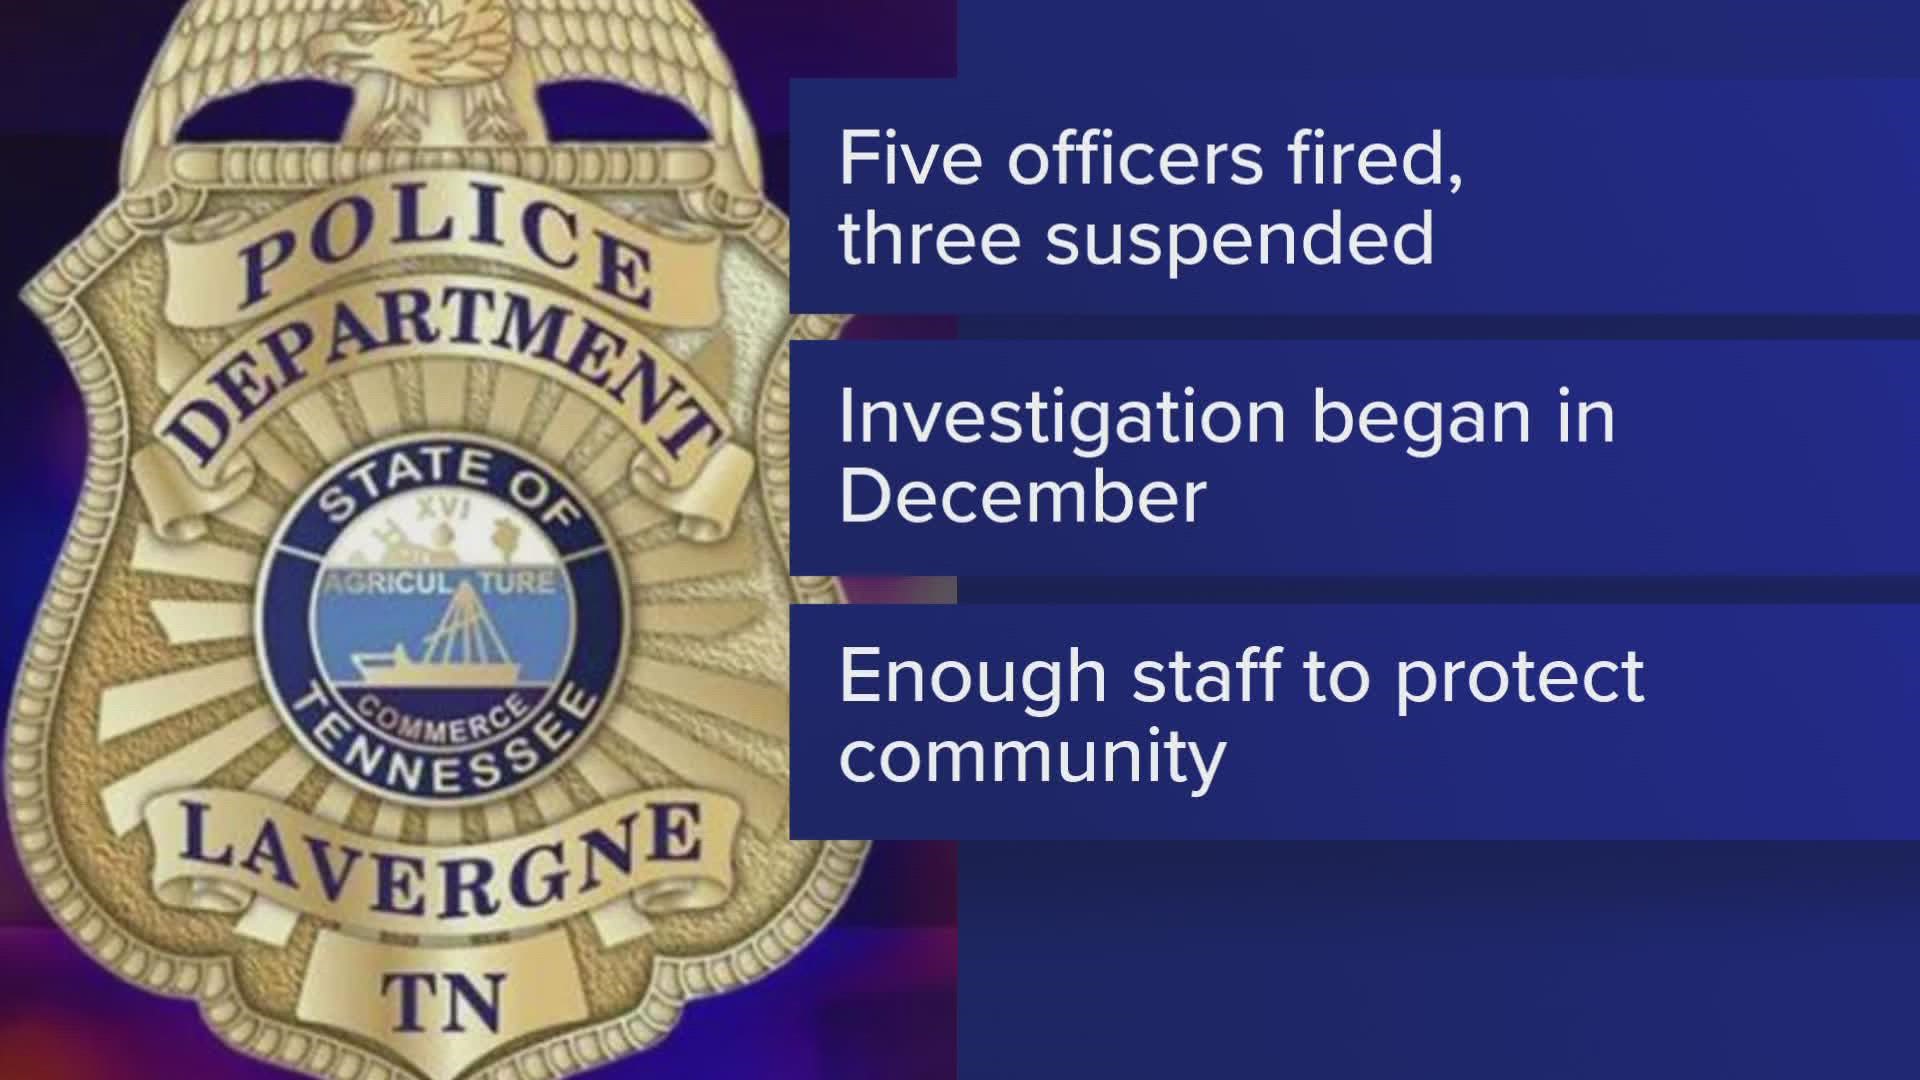 The investigation alleges some officers had sex inside some city-owned property.